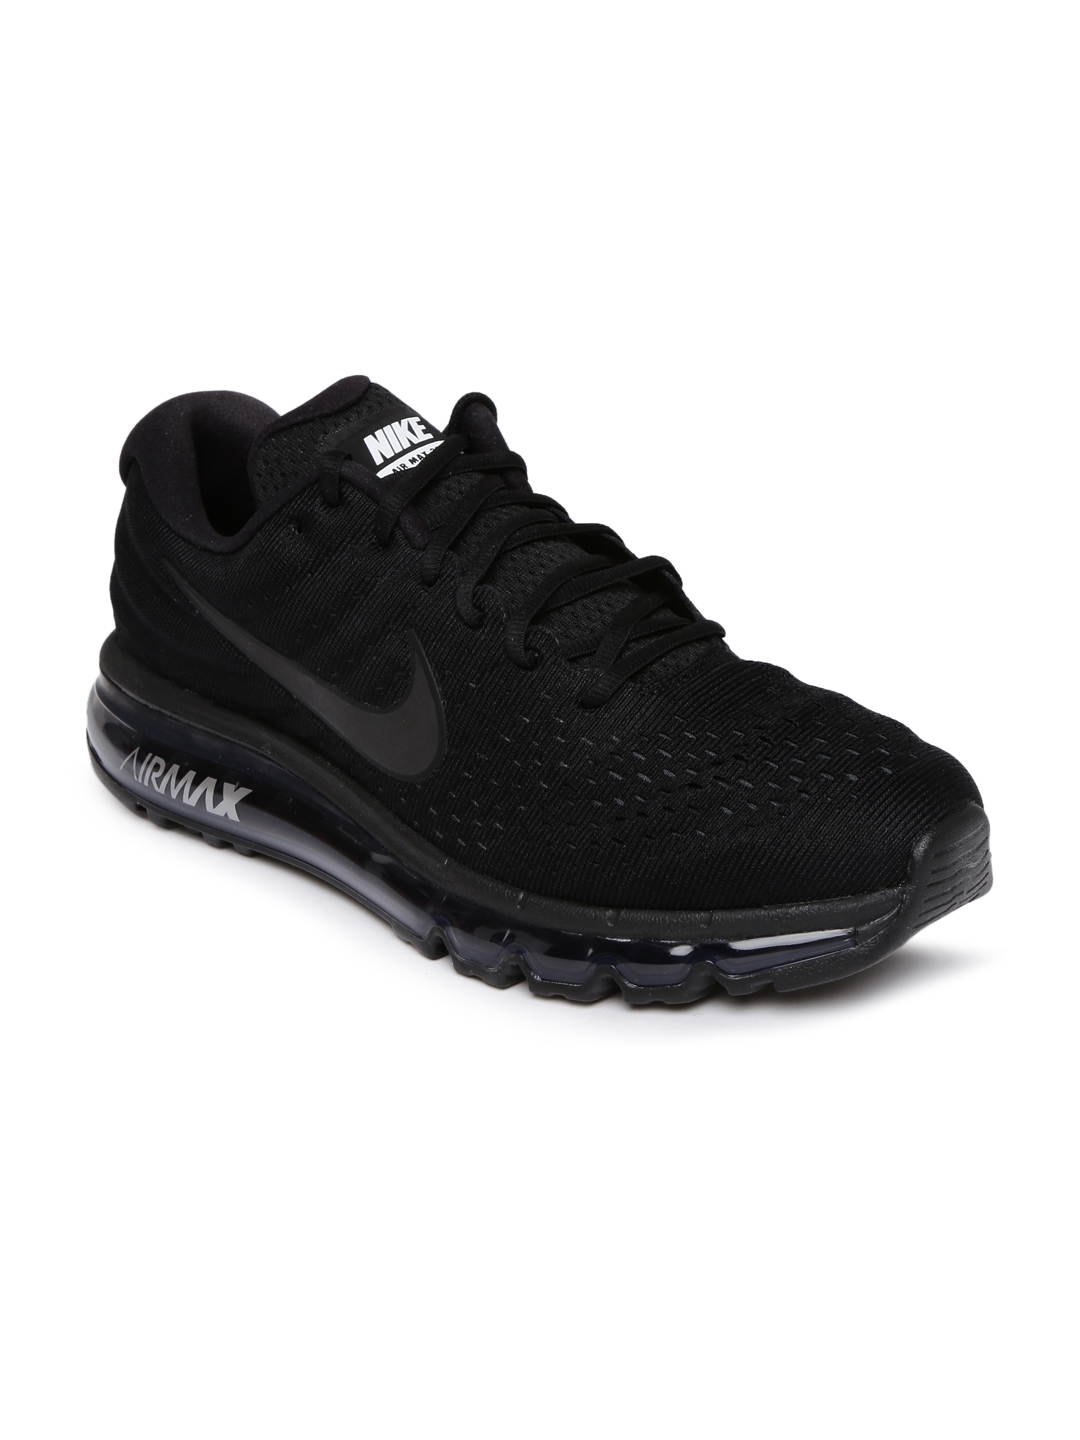 Cornwall snow White Need Buy Nike Men Black Air Max 2017 Running Shoes - Sports Shoes for Men  2480211 | Myntra